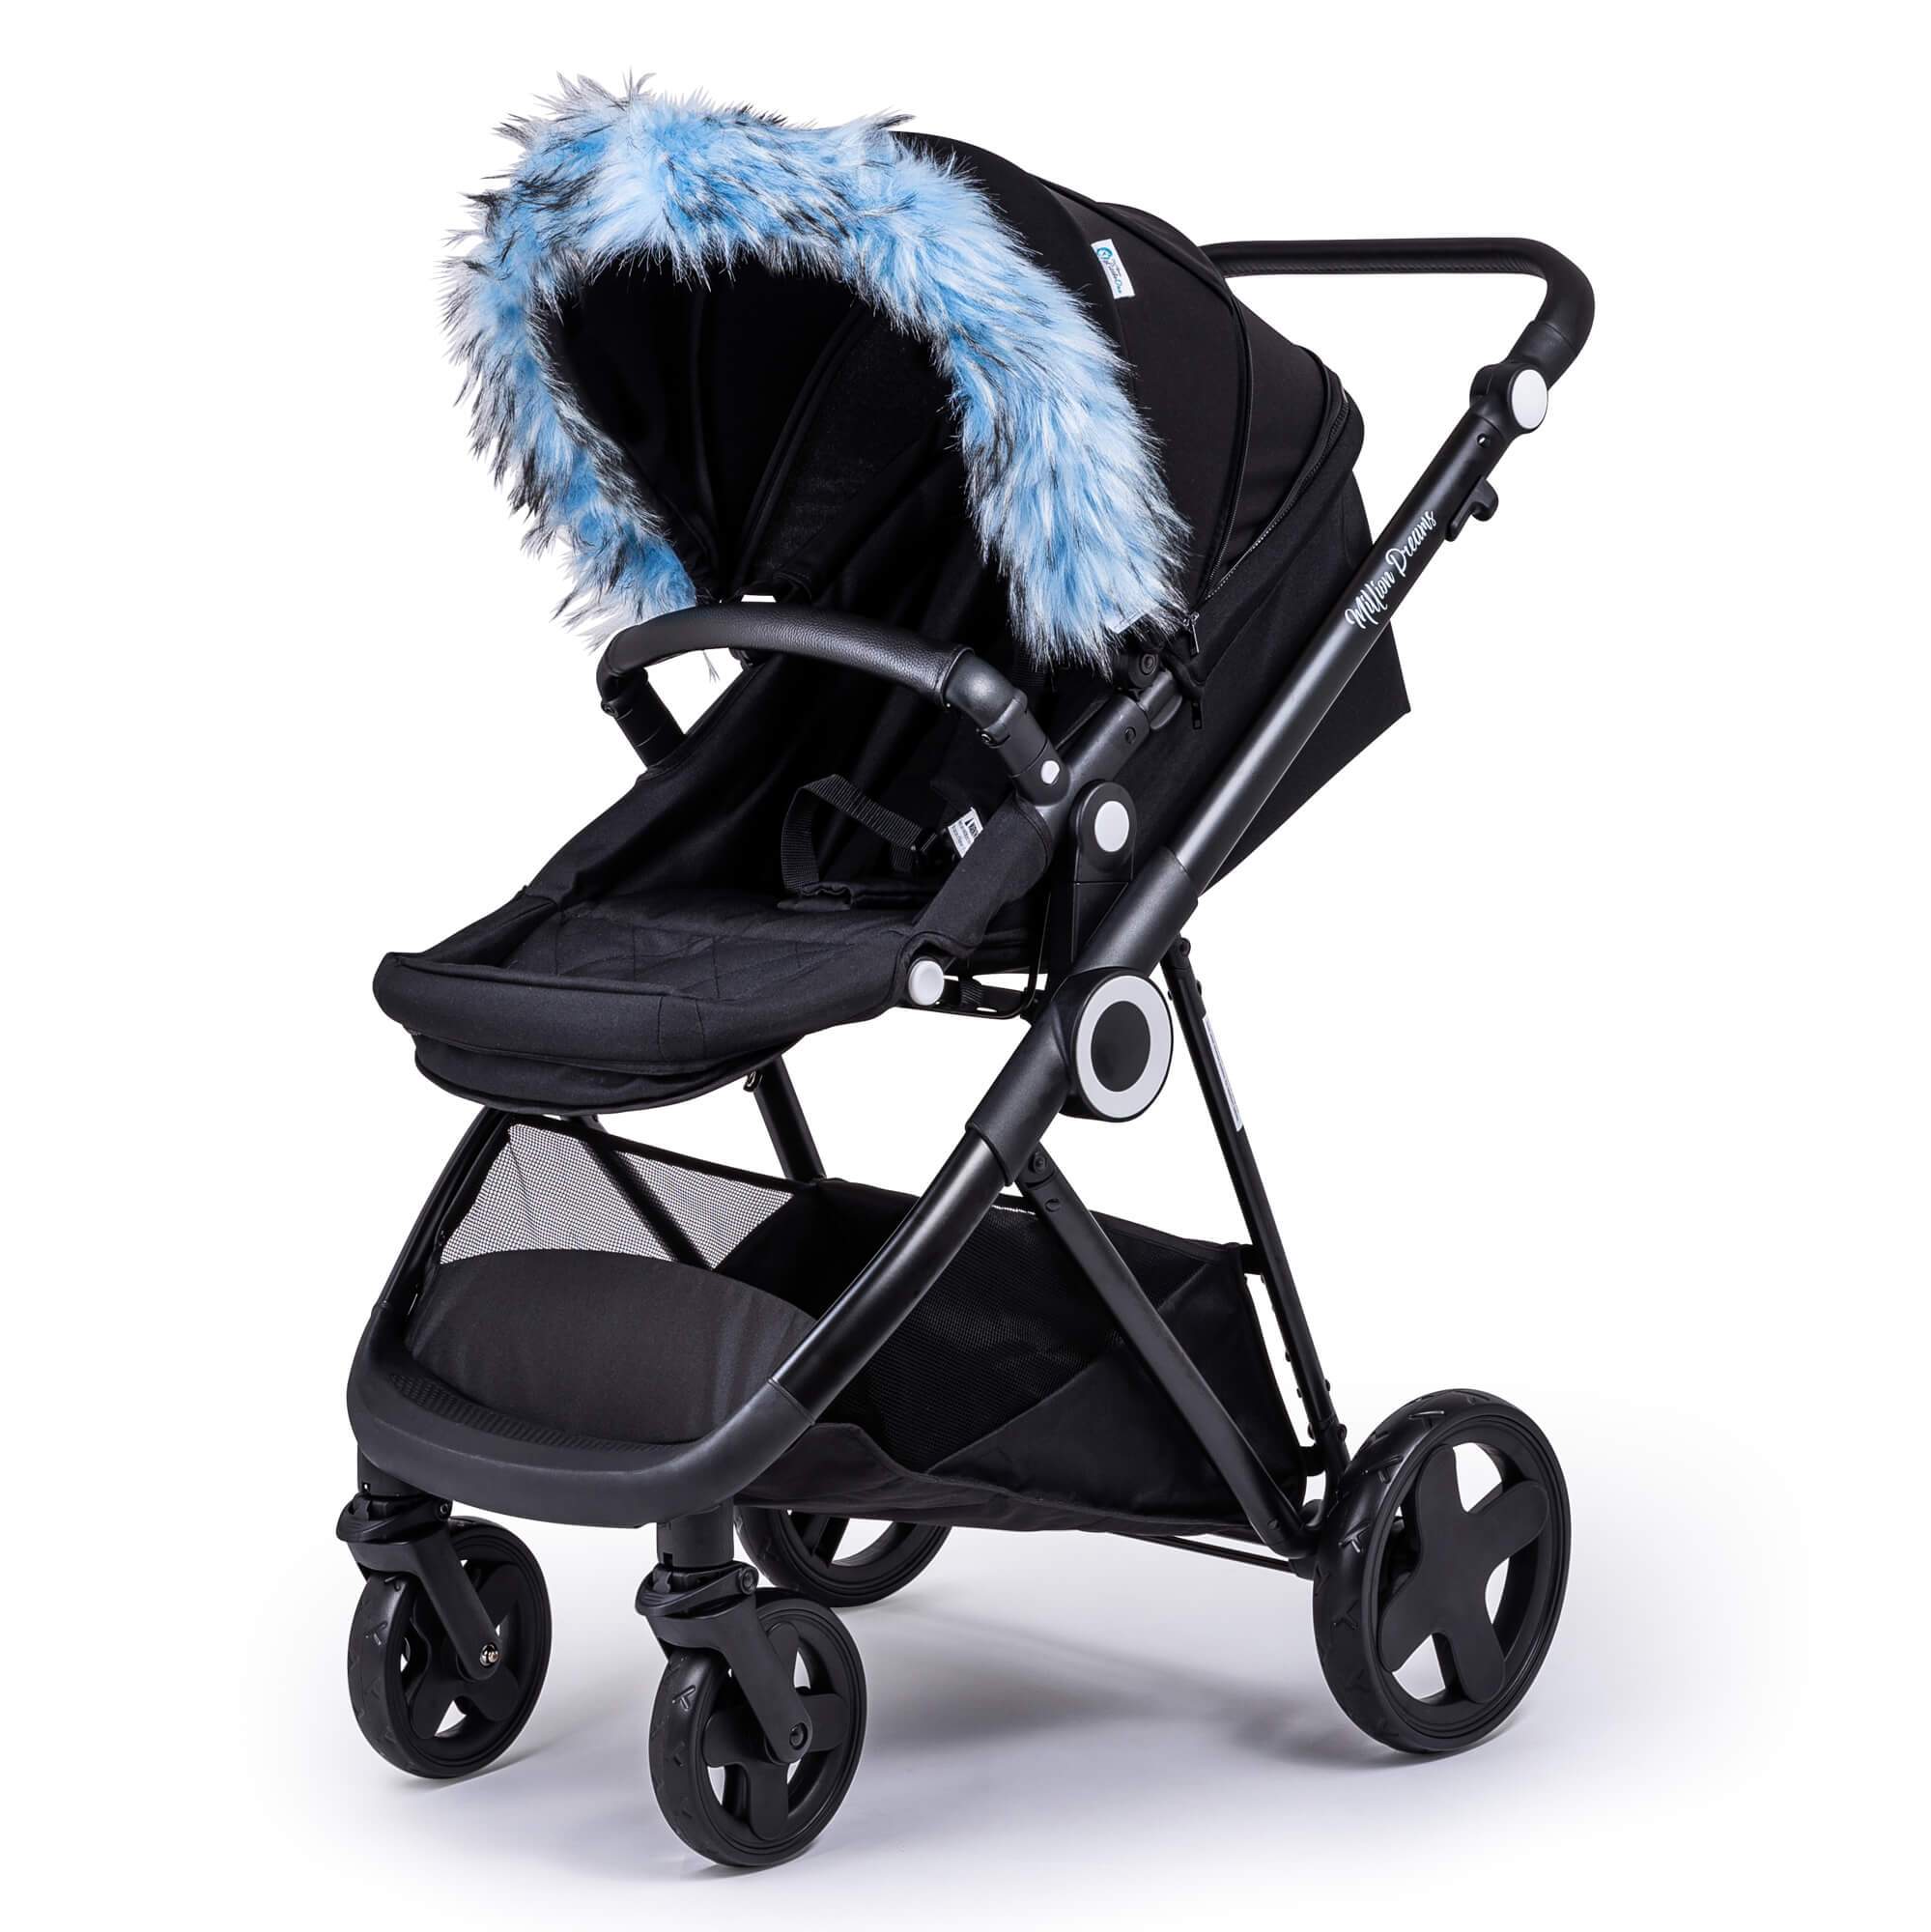 Pram Fur Hood Trim Attachment for Pushchair Compatible with Teutonia - Light Blue / Fits All Models | For Your Little One